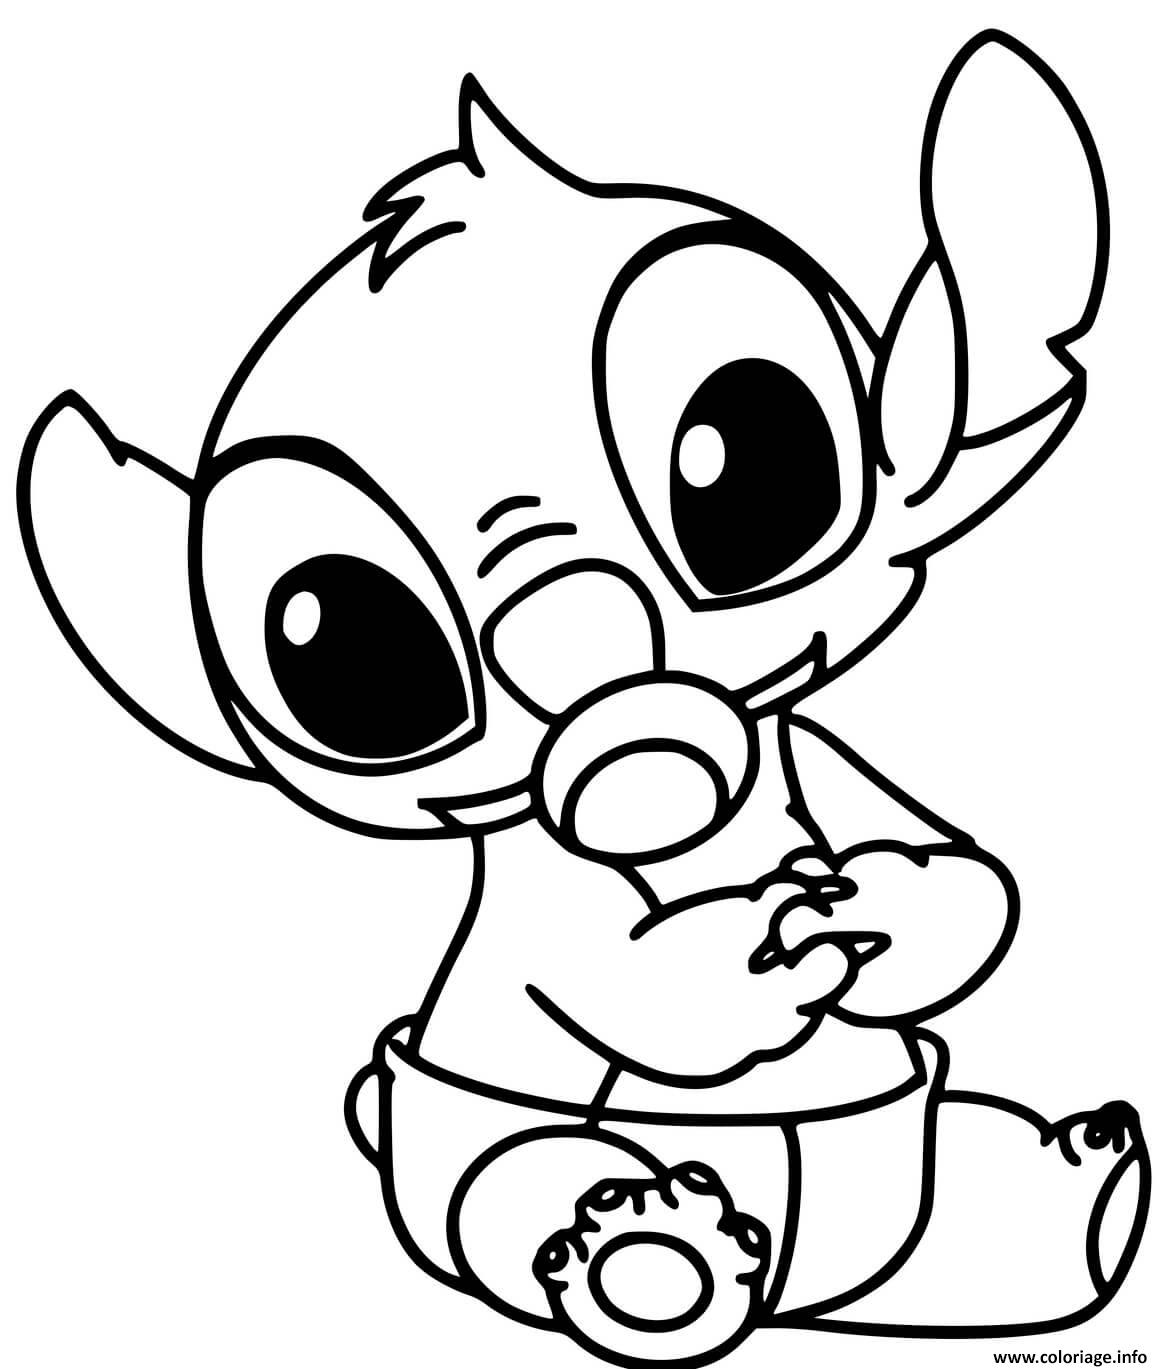 https://coloriage.info/images/ccovers/1672334496bebe-stitch.jpg